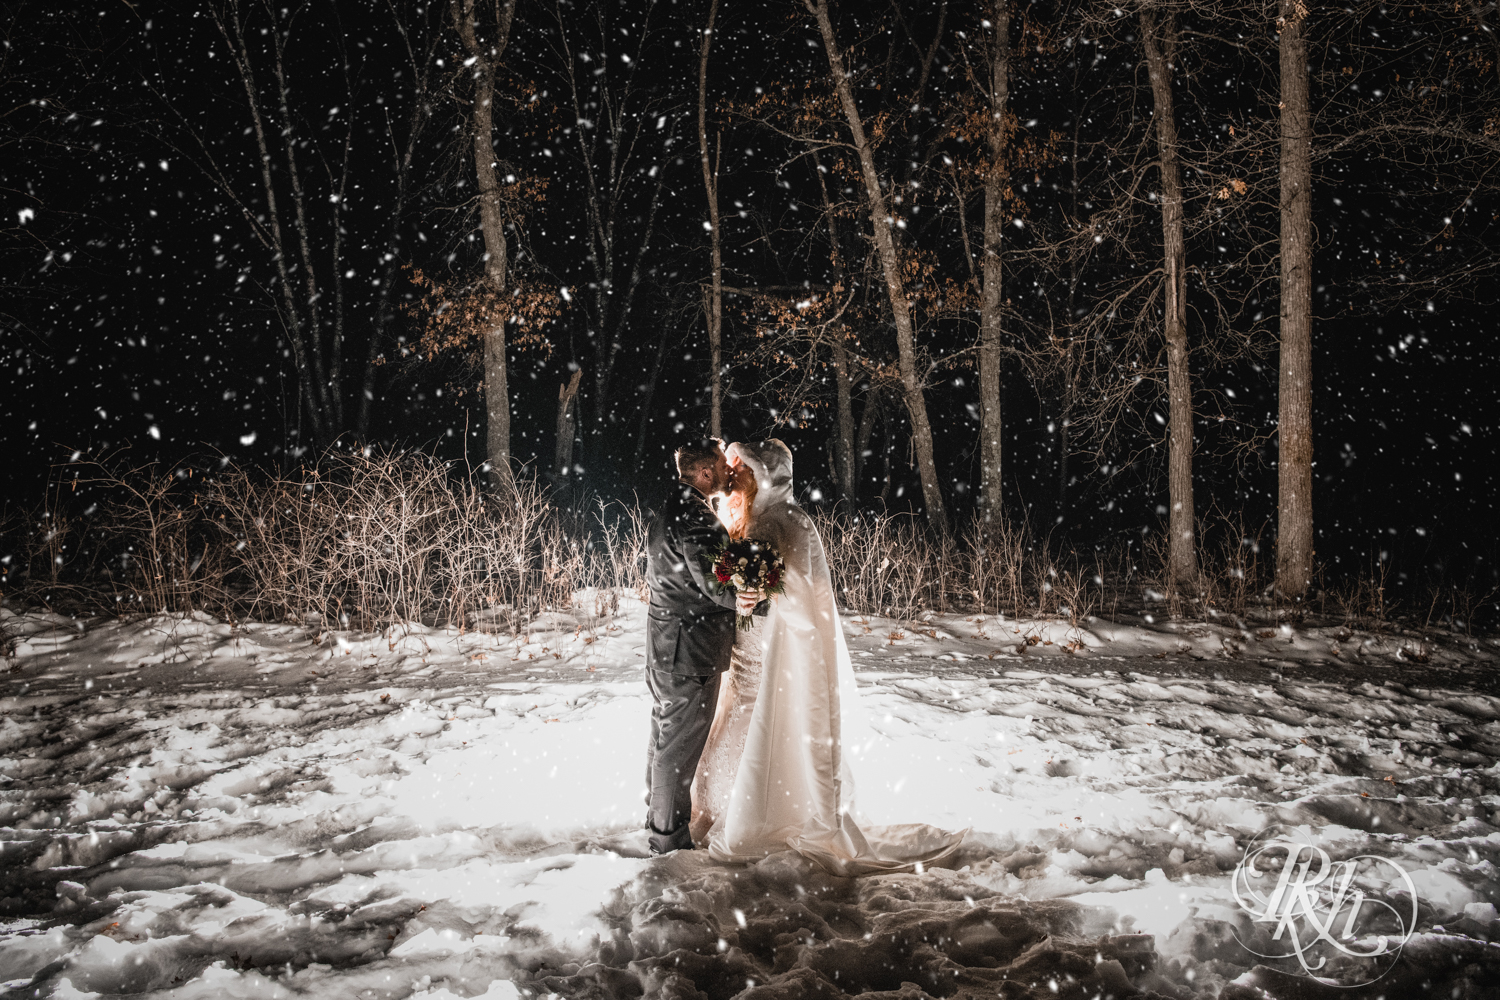 Bride and groom kiss in falling snow during winter wedding at Whitefish Lodge in Crosslake, Minnesota.